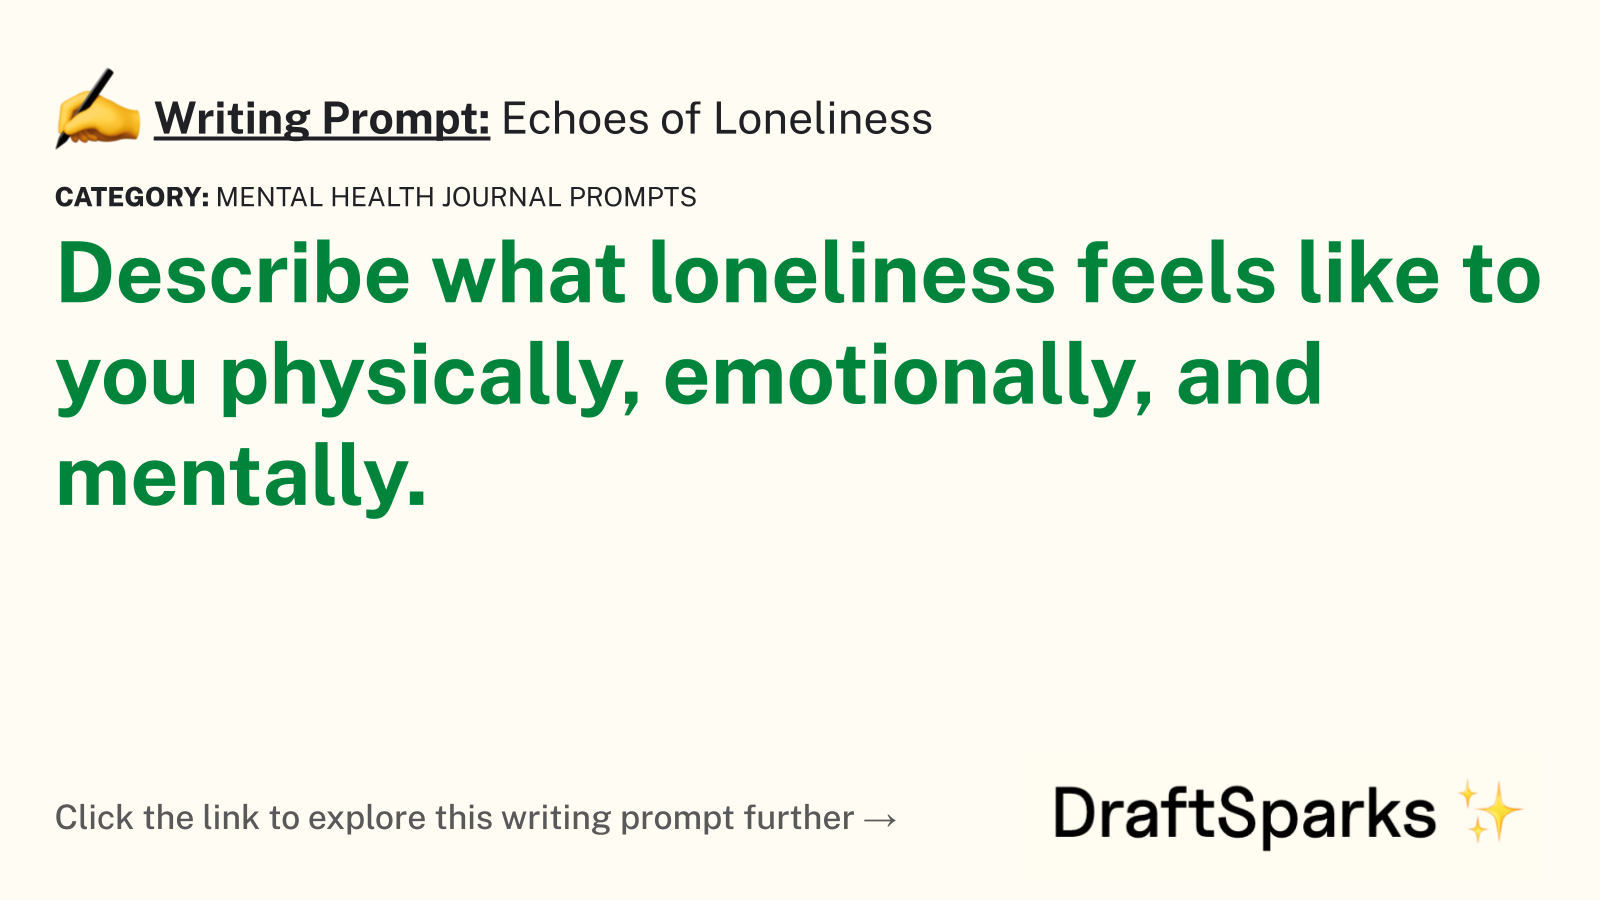 Echoes of Loneliness